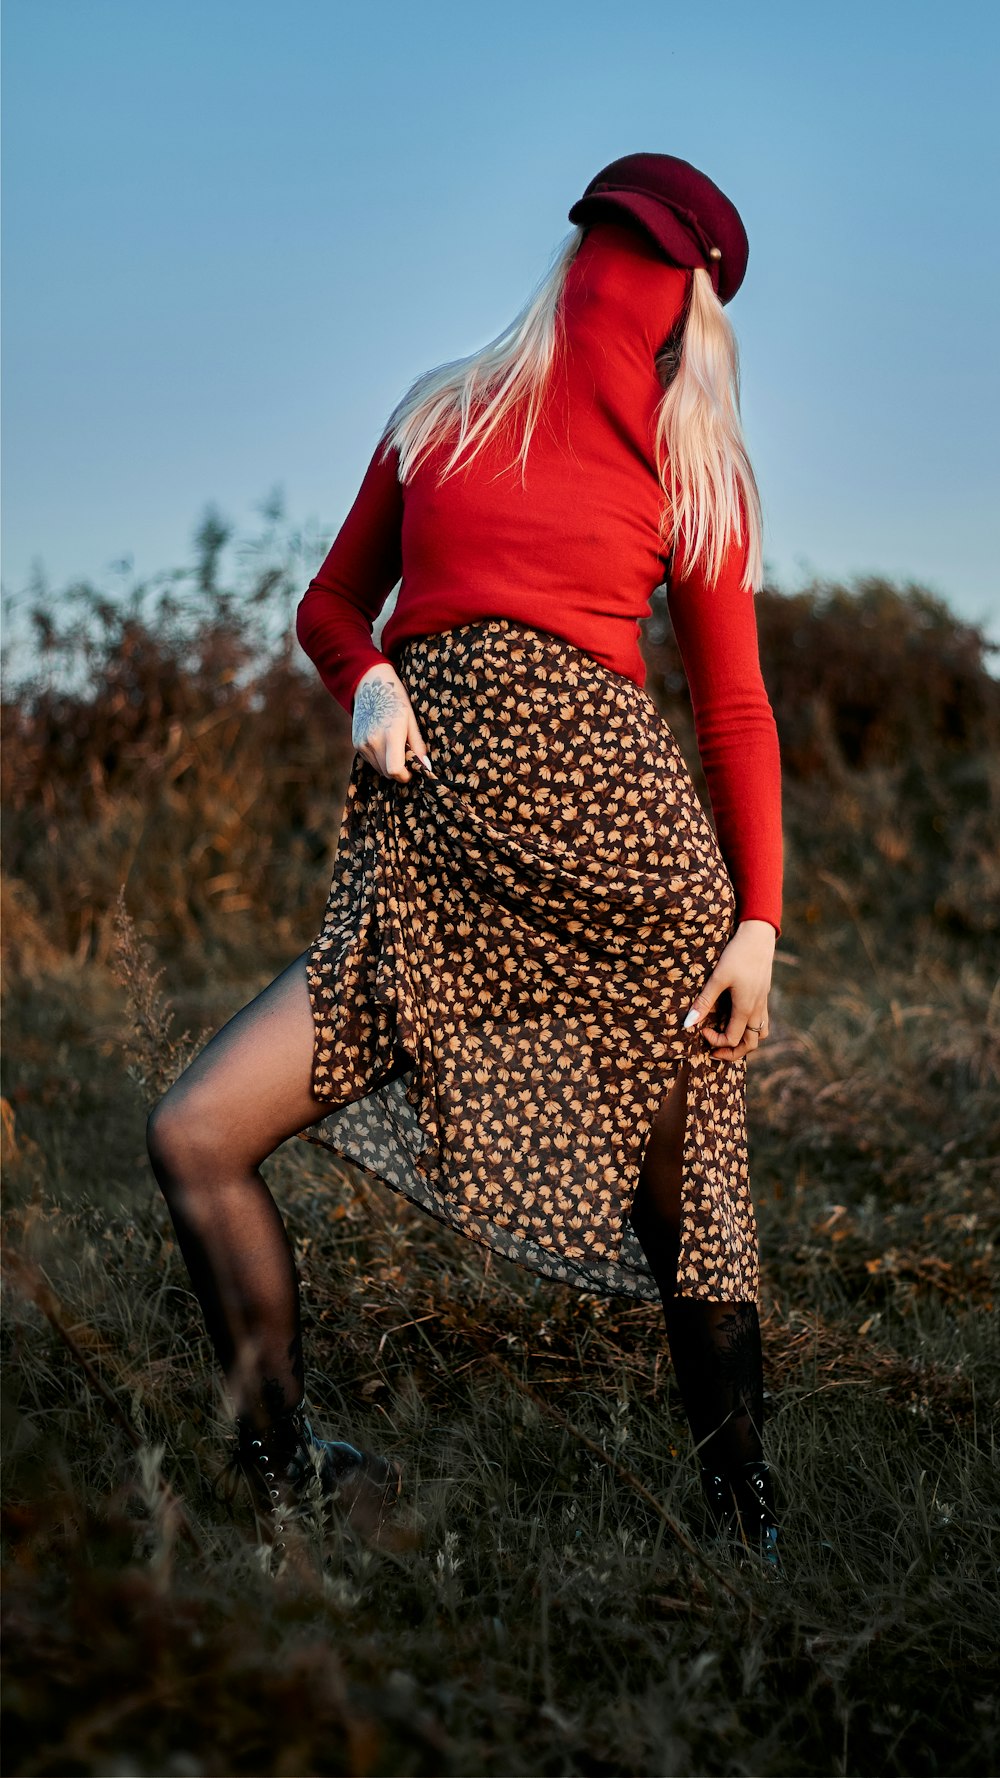 woman in red long sleeve shirt and black and white polka dots skirt standing on brown